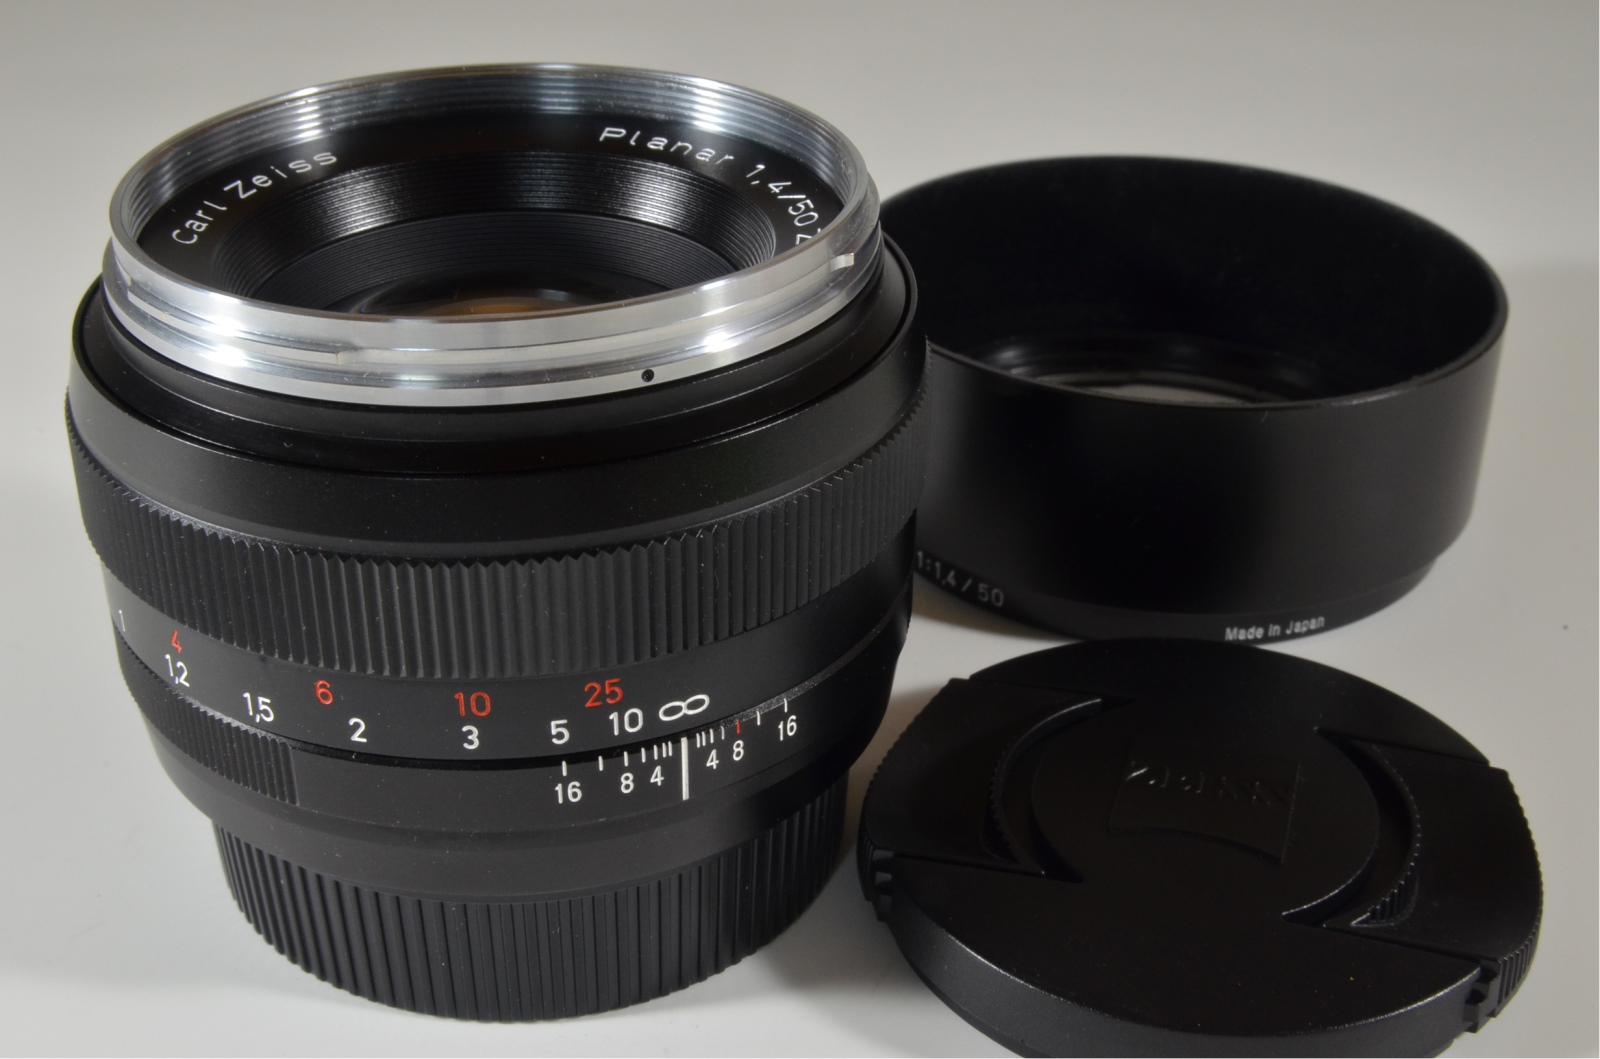 Carl Zeiss Planar T 50mm F 1 4 Ze For Canon A0045 Superb Japan Camera